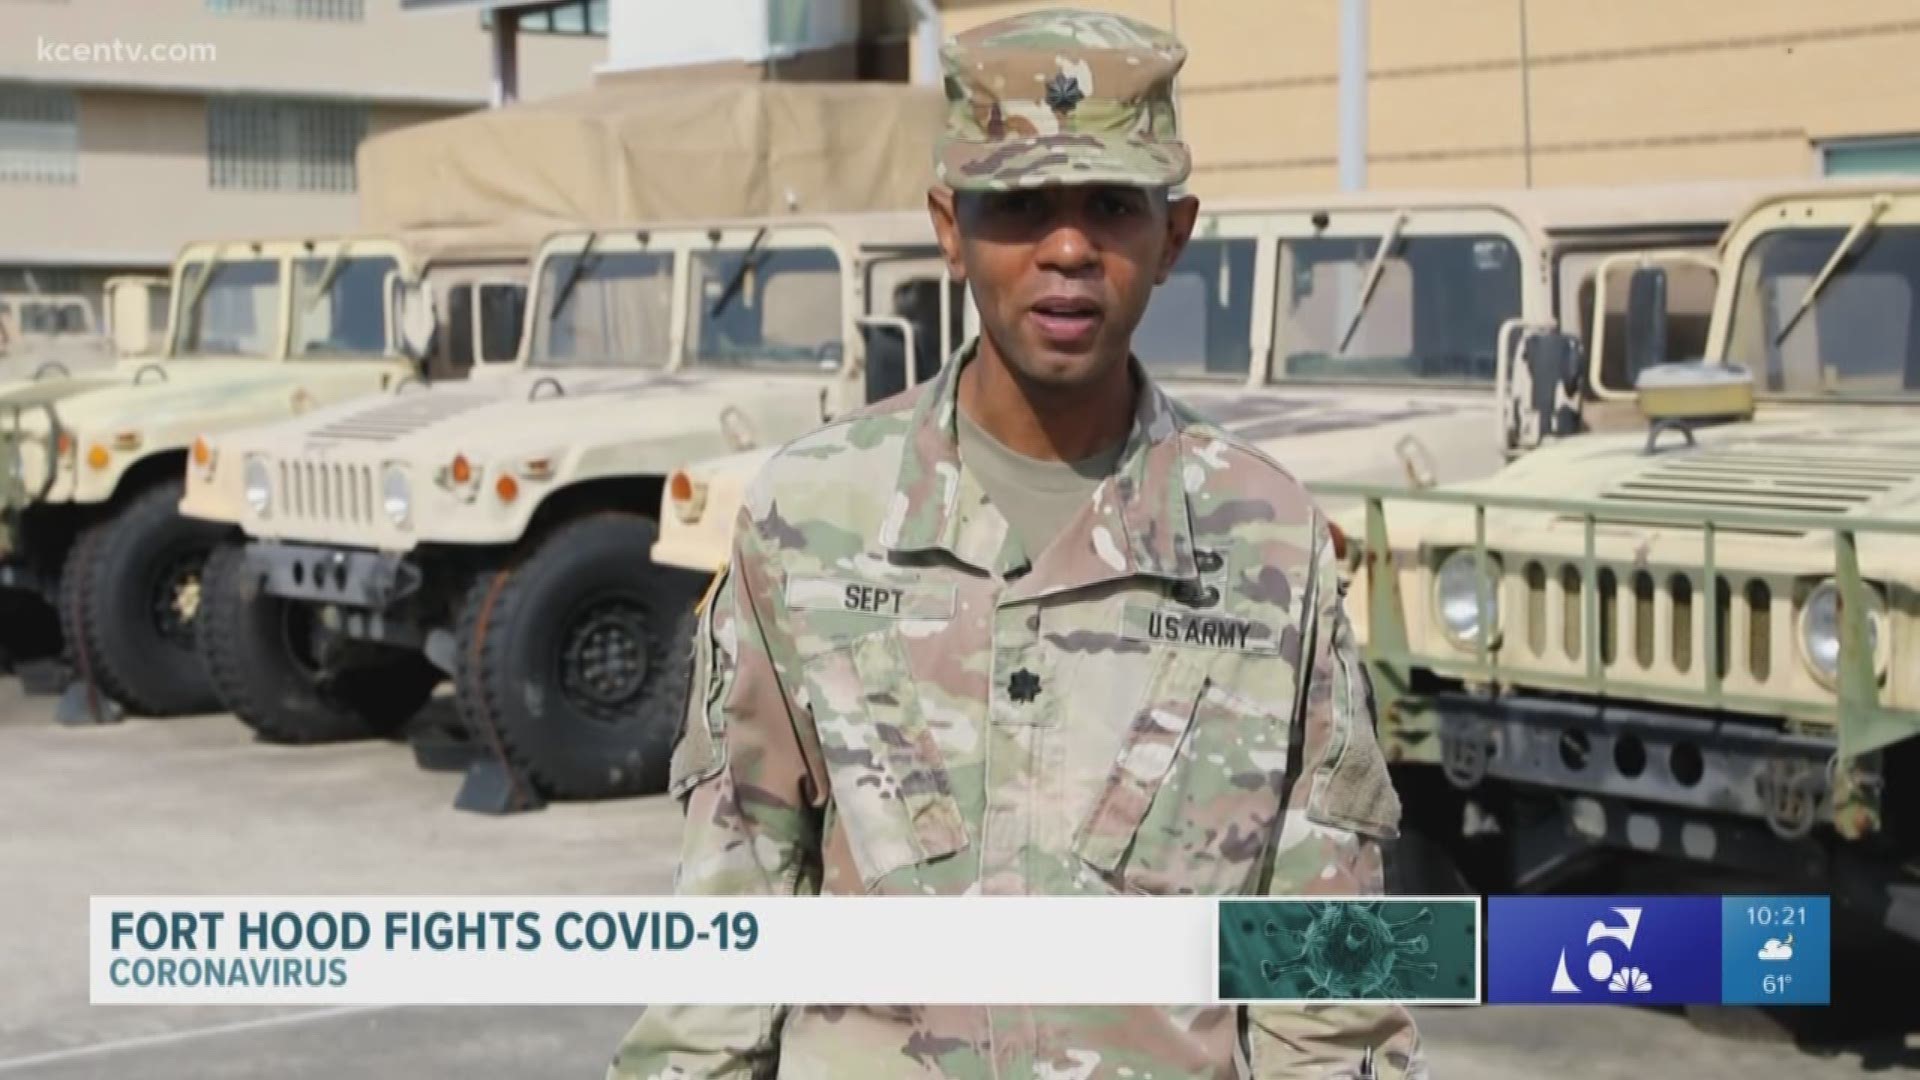 Lt. Col. Travis Sept delivered a brief message to those on coronavirus response missions.